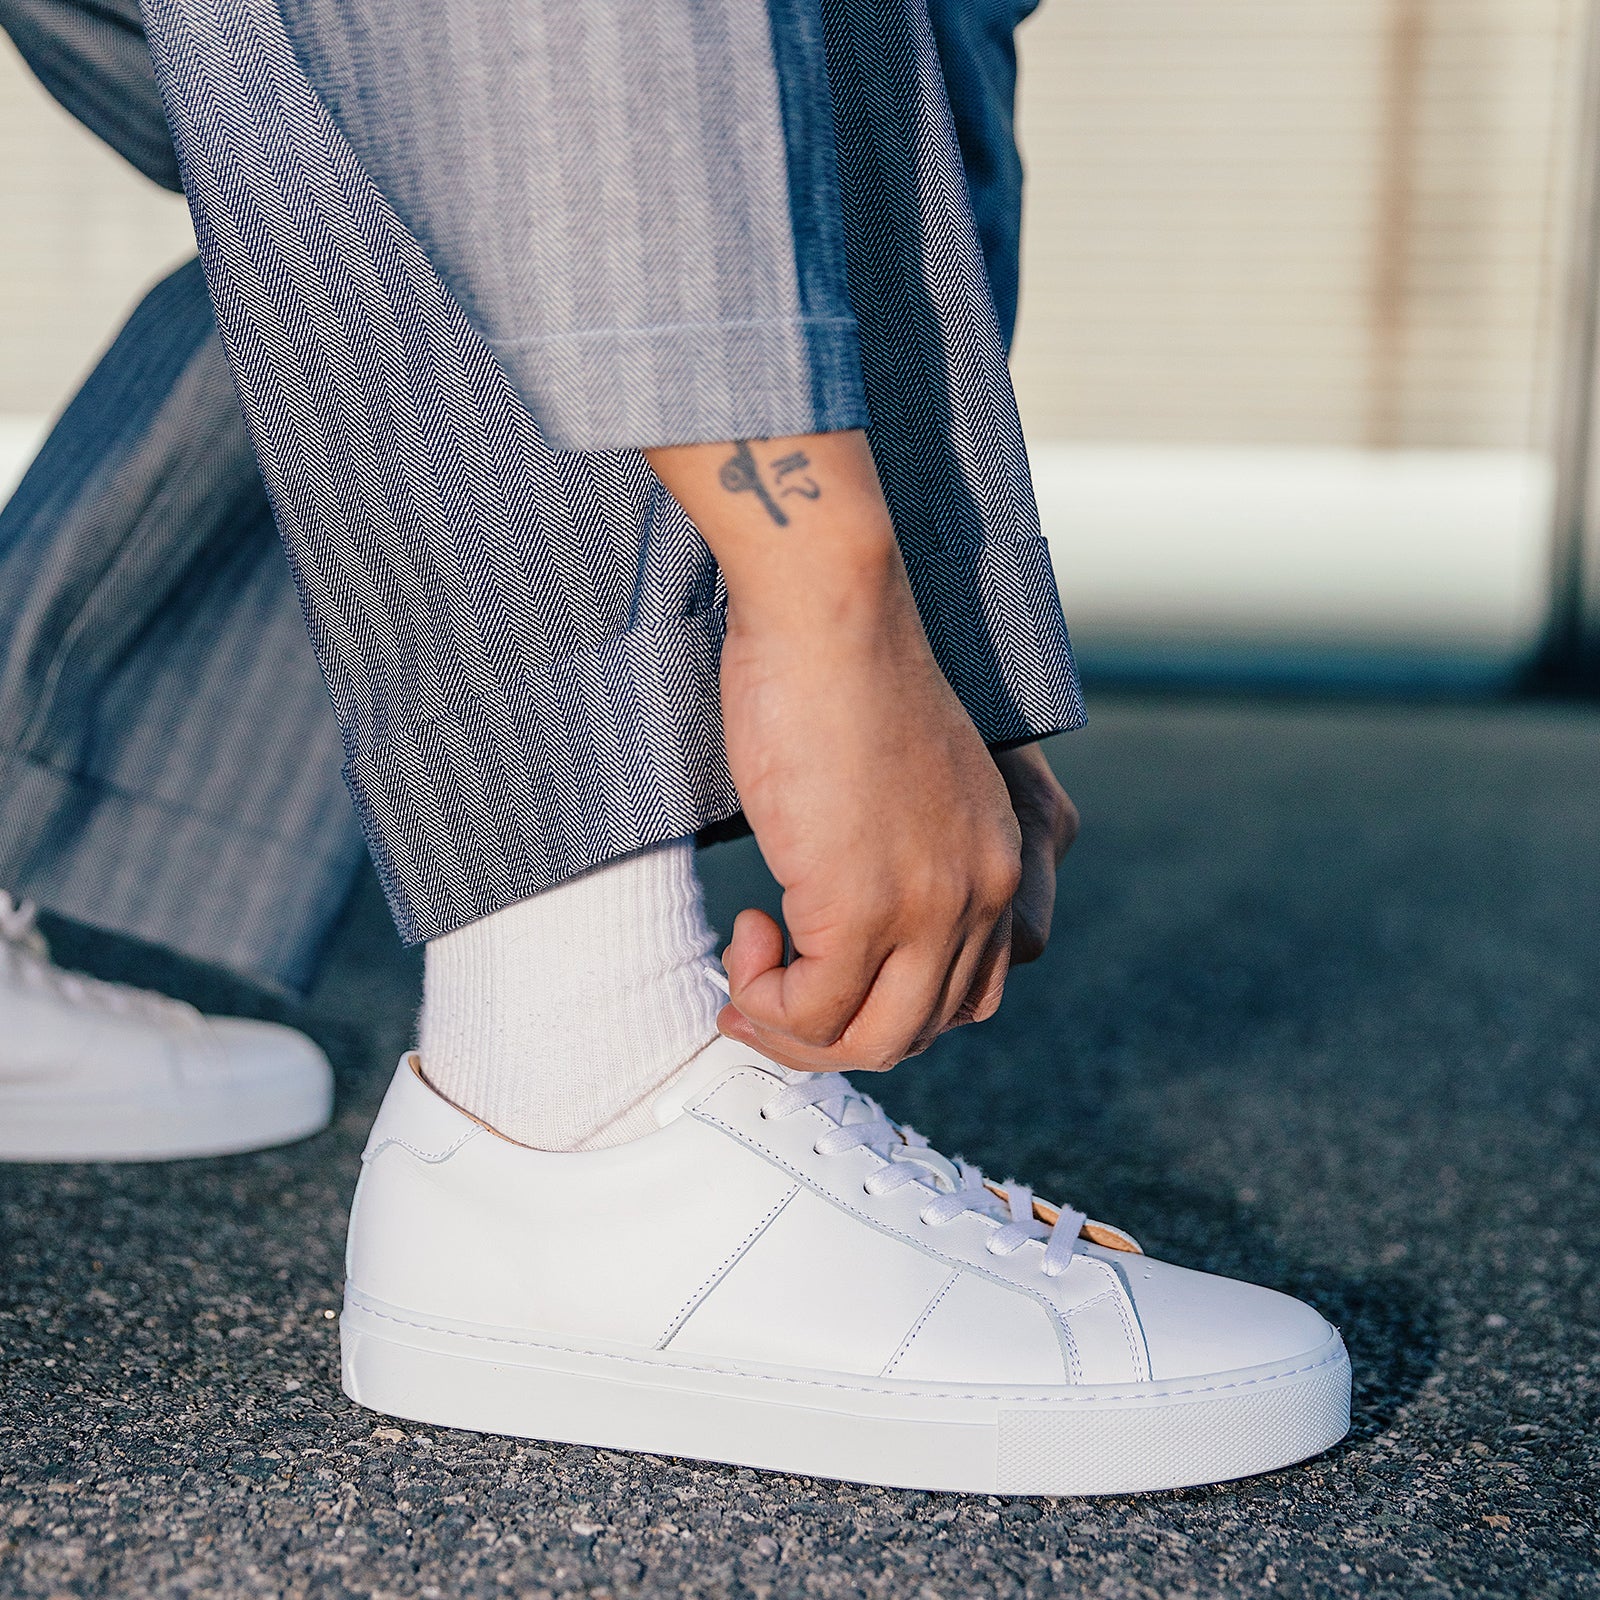 Lazy Luxury' Sneakers: Are These the Most-Worn Shoes on Private